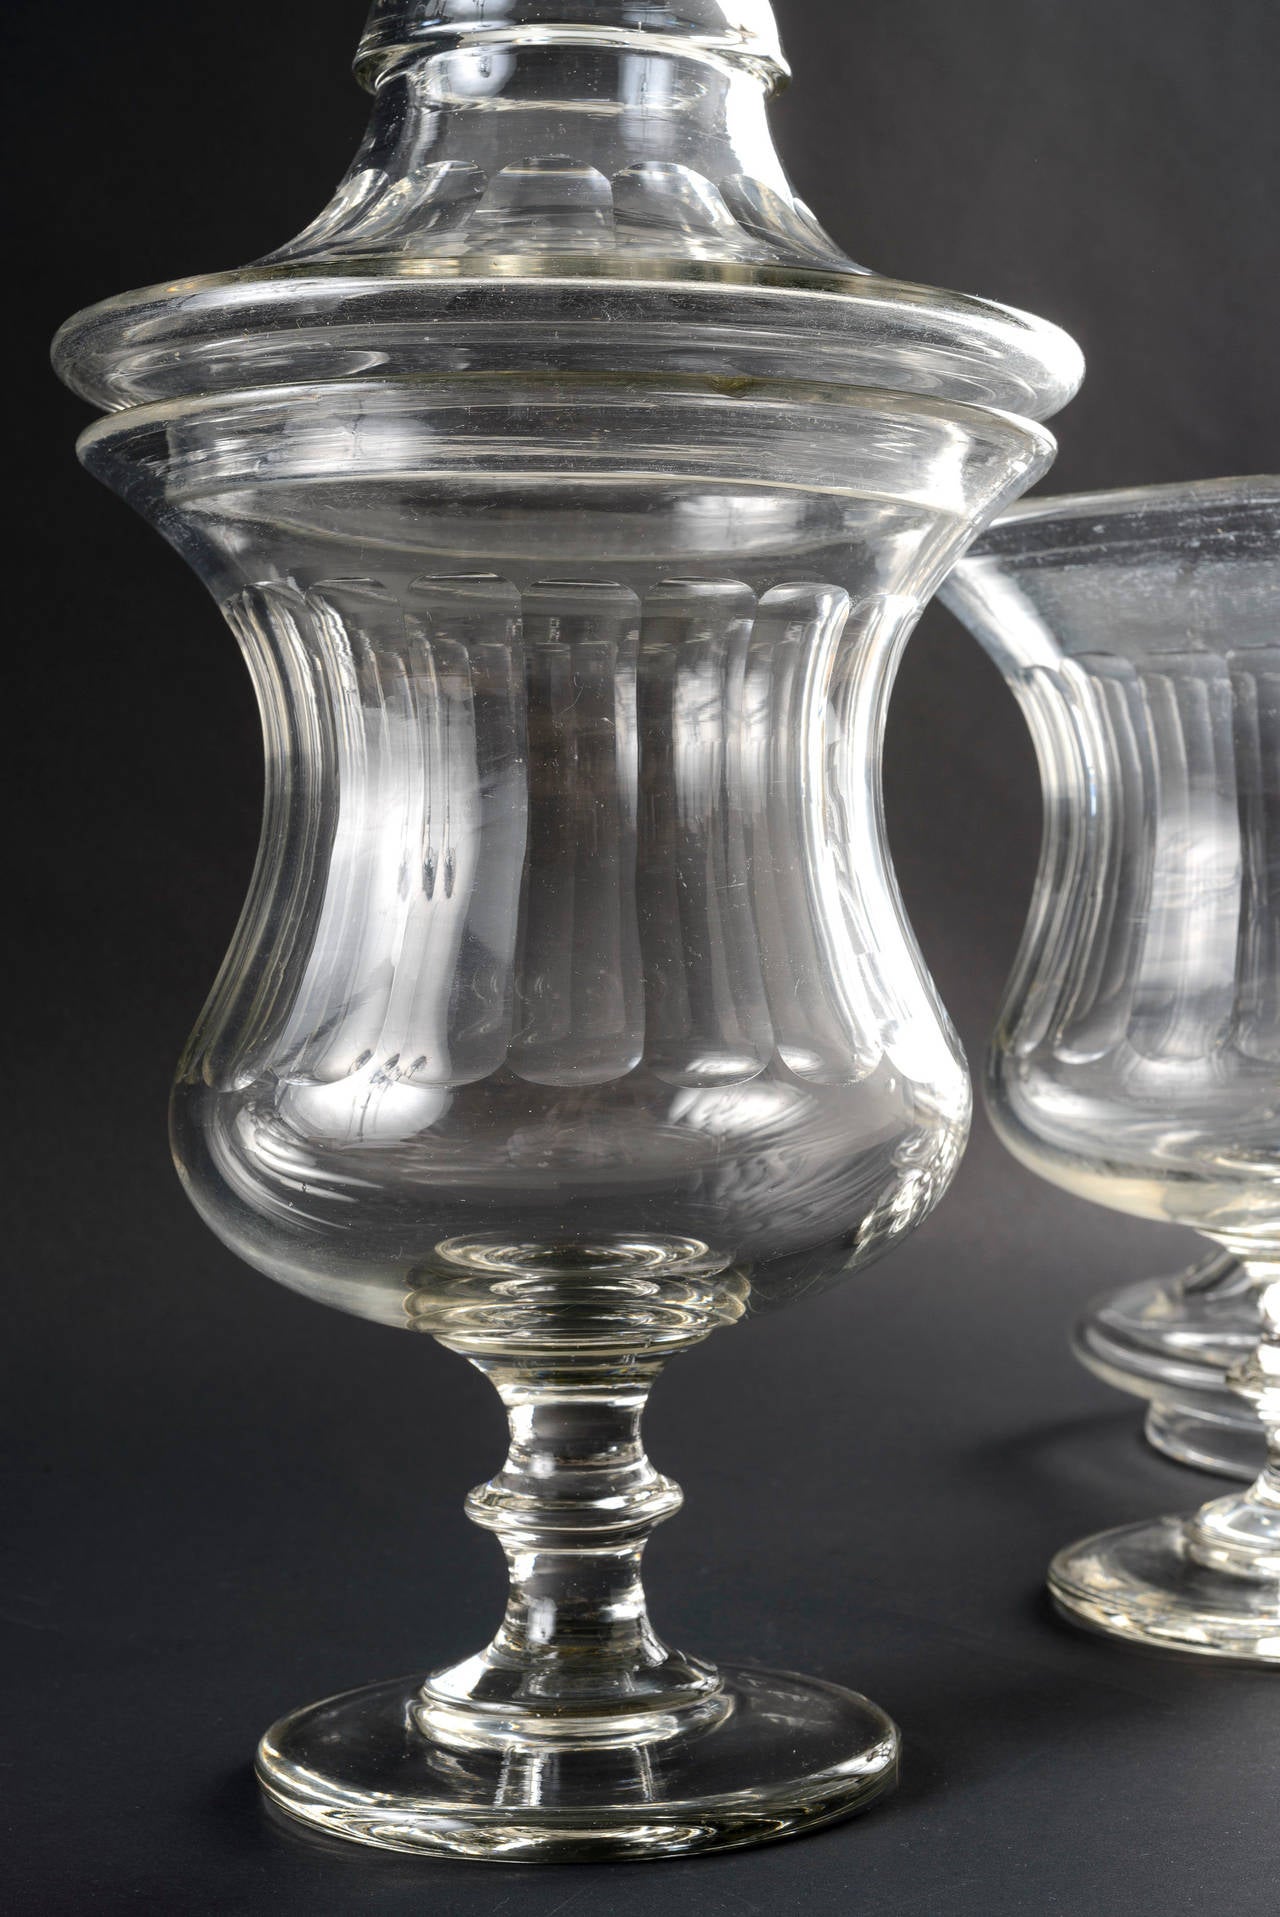 This pair of French goblet shape apothecary jars with covers are a matched set. The large-scale gives a formidable presence to the pair. The ringed base of the jar is in good scale with the finial of the cover. There is a minor chip on each of the